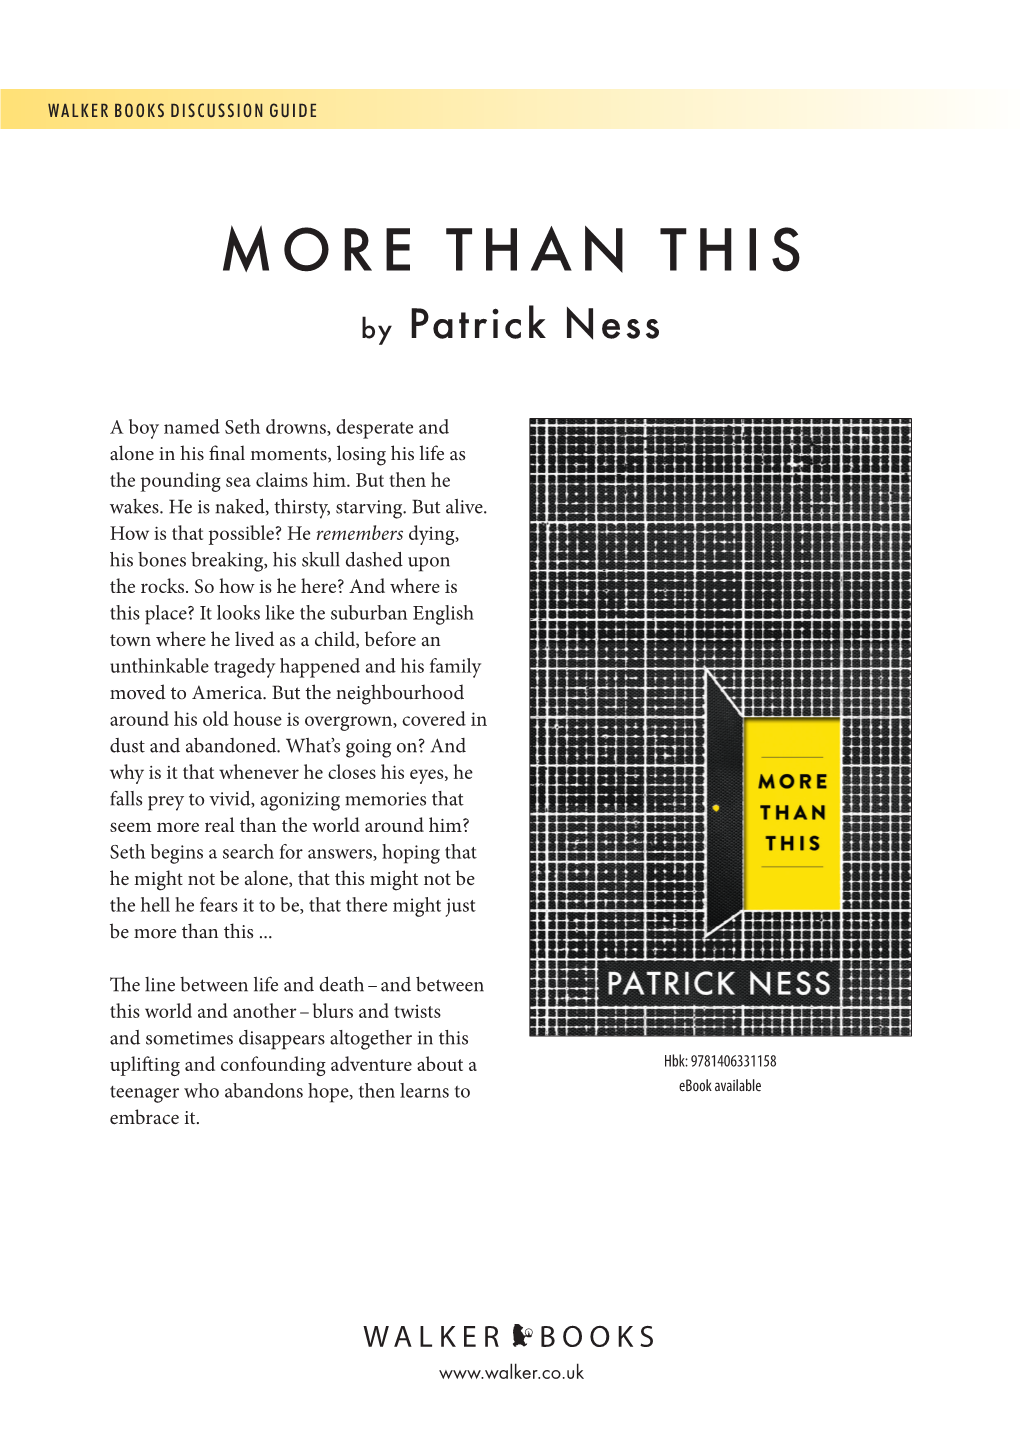 Than This by Patrick Ness